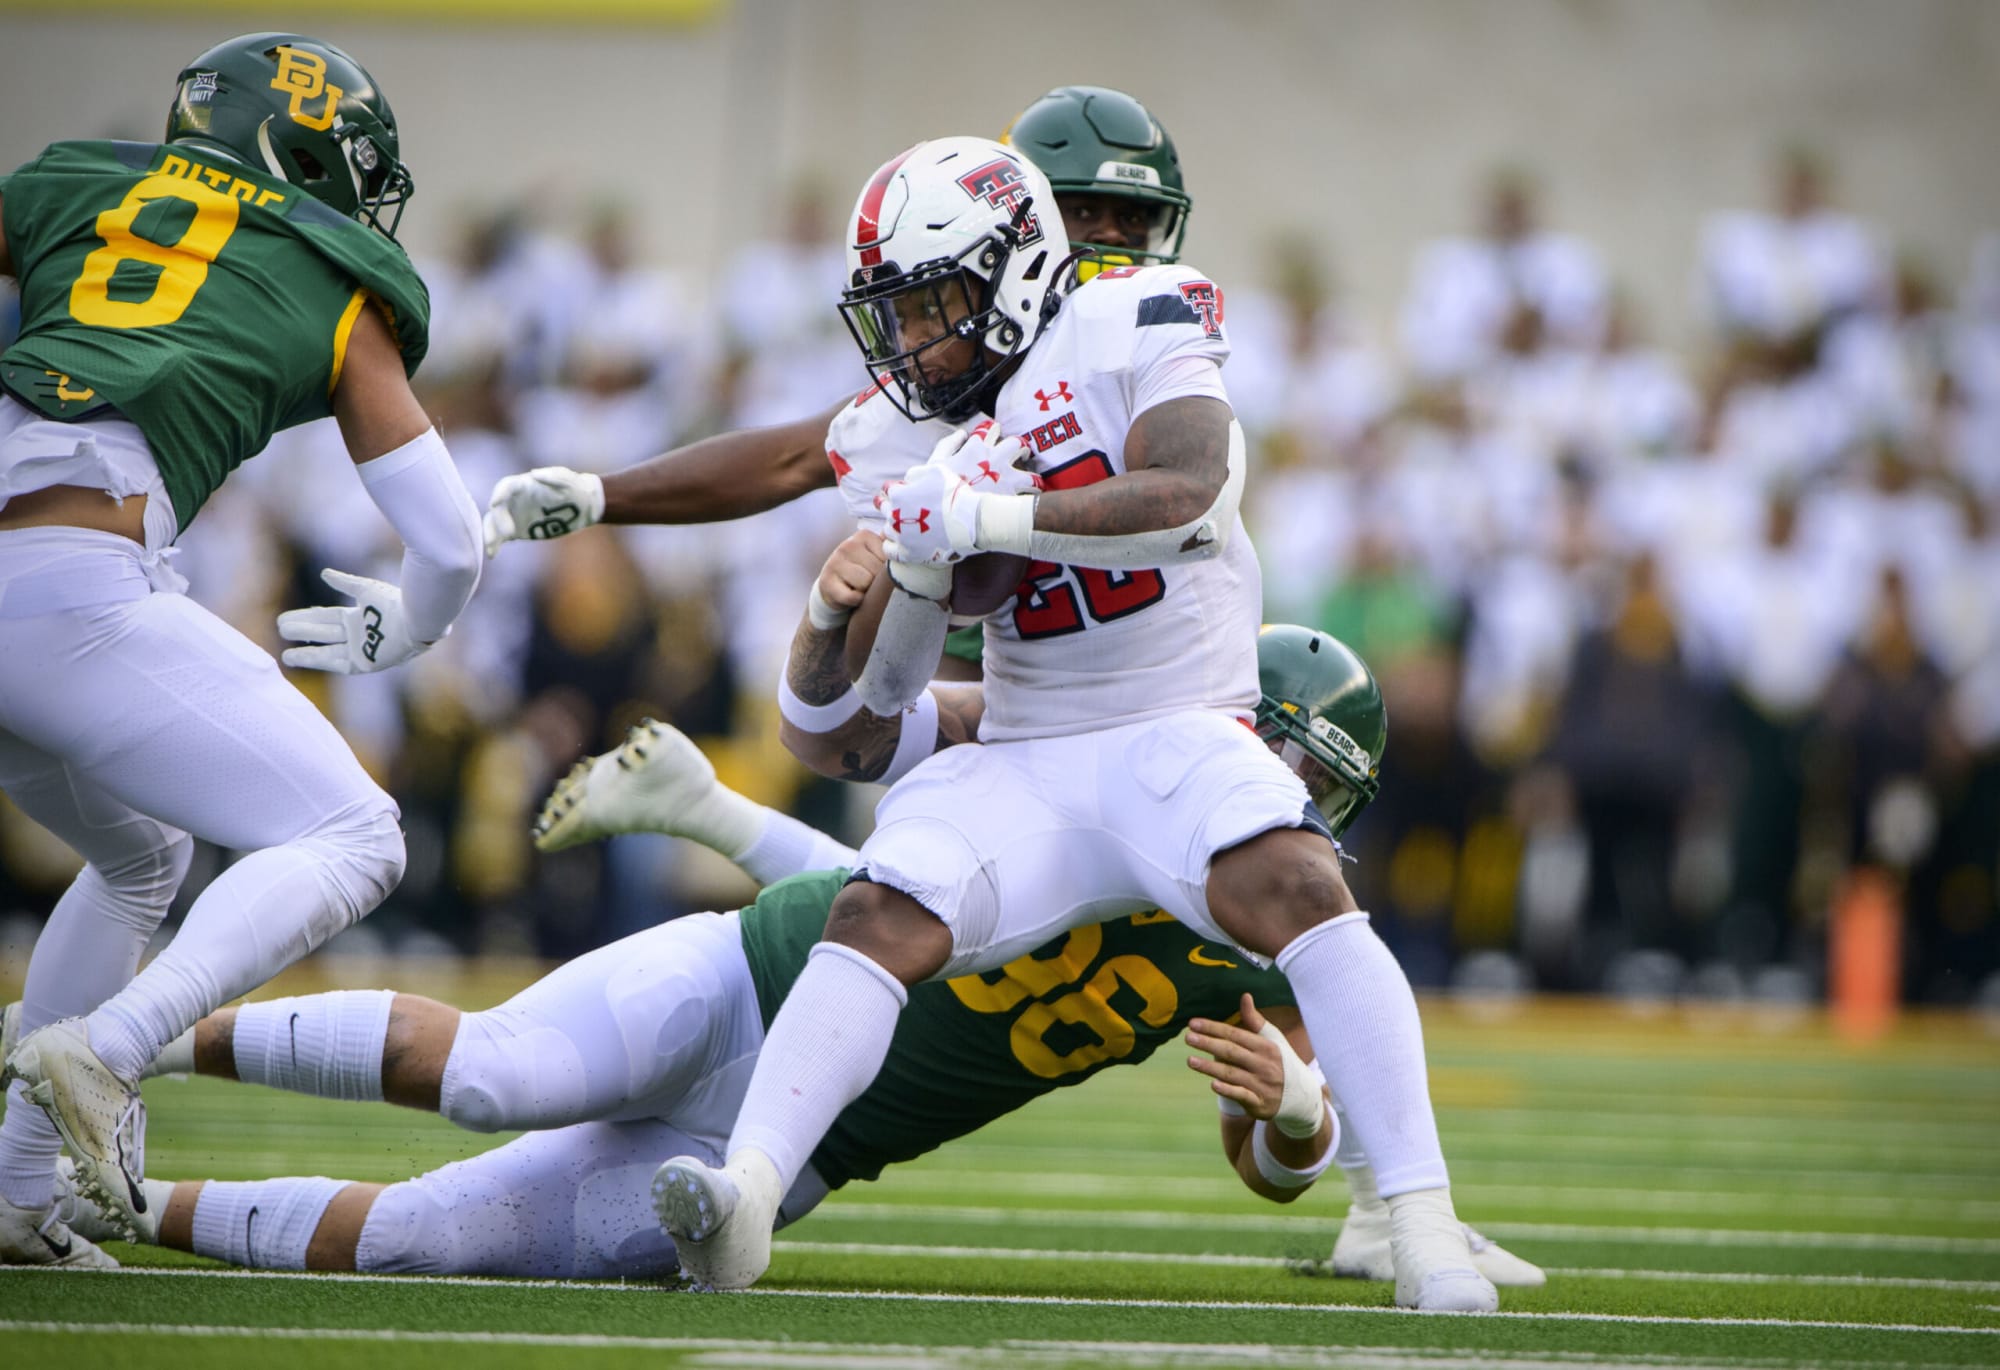 Texas Tech football: Statistical categories to watch as Red Raiders visit Baylor